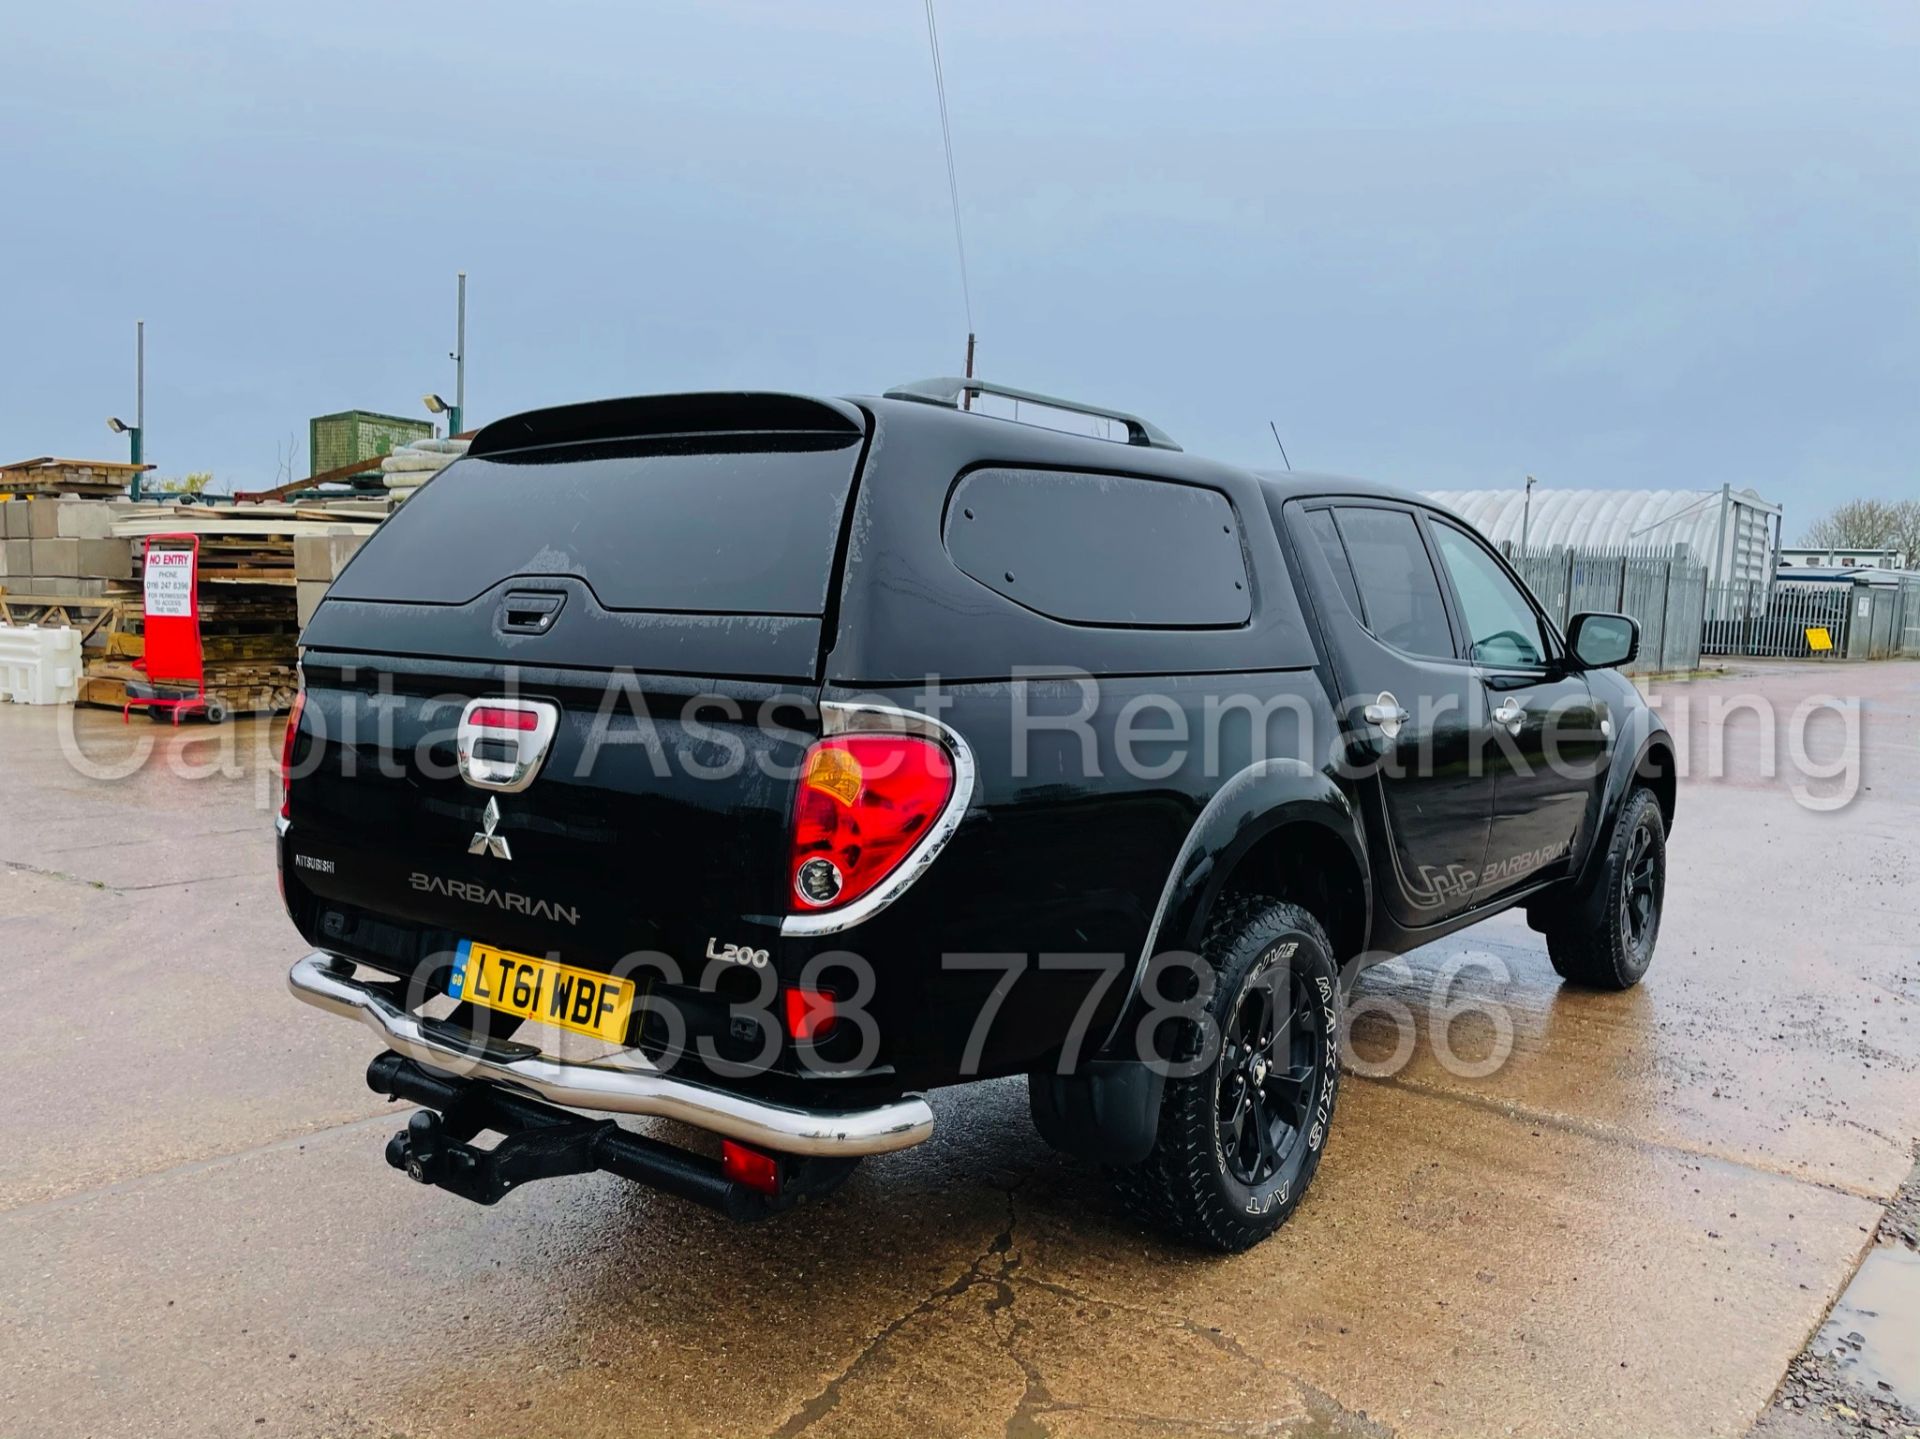 (On Sale) MITSUBISHI L200 *BARBARIAN EDITION* DOUBLE CAB PICK-UP (61 REG) 'AUTO - LEATHER - SAT NAV' - Image 12 of 42